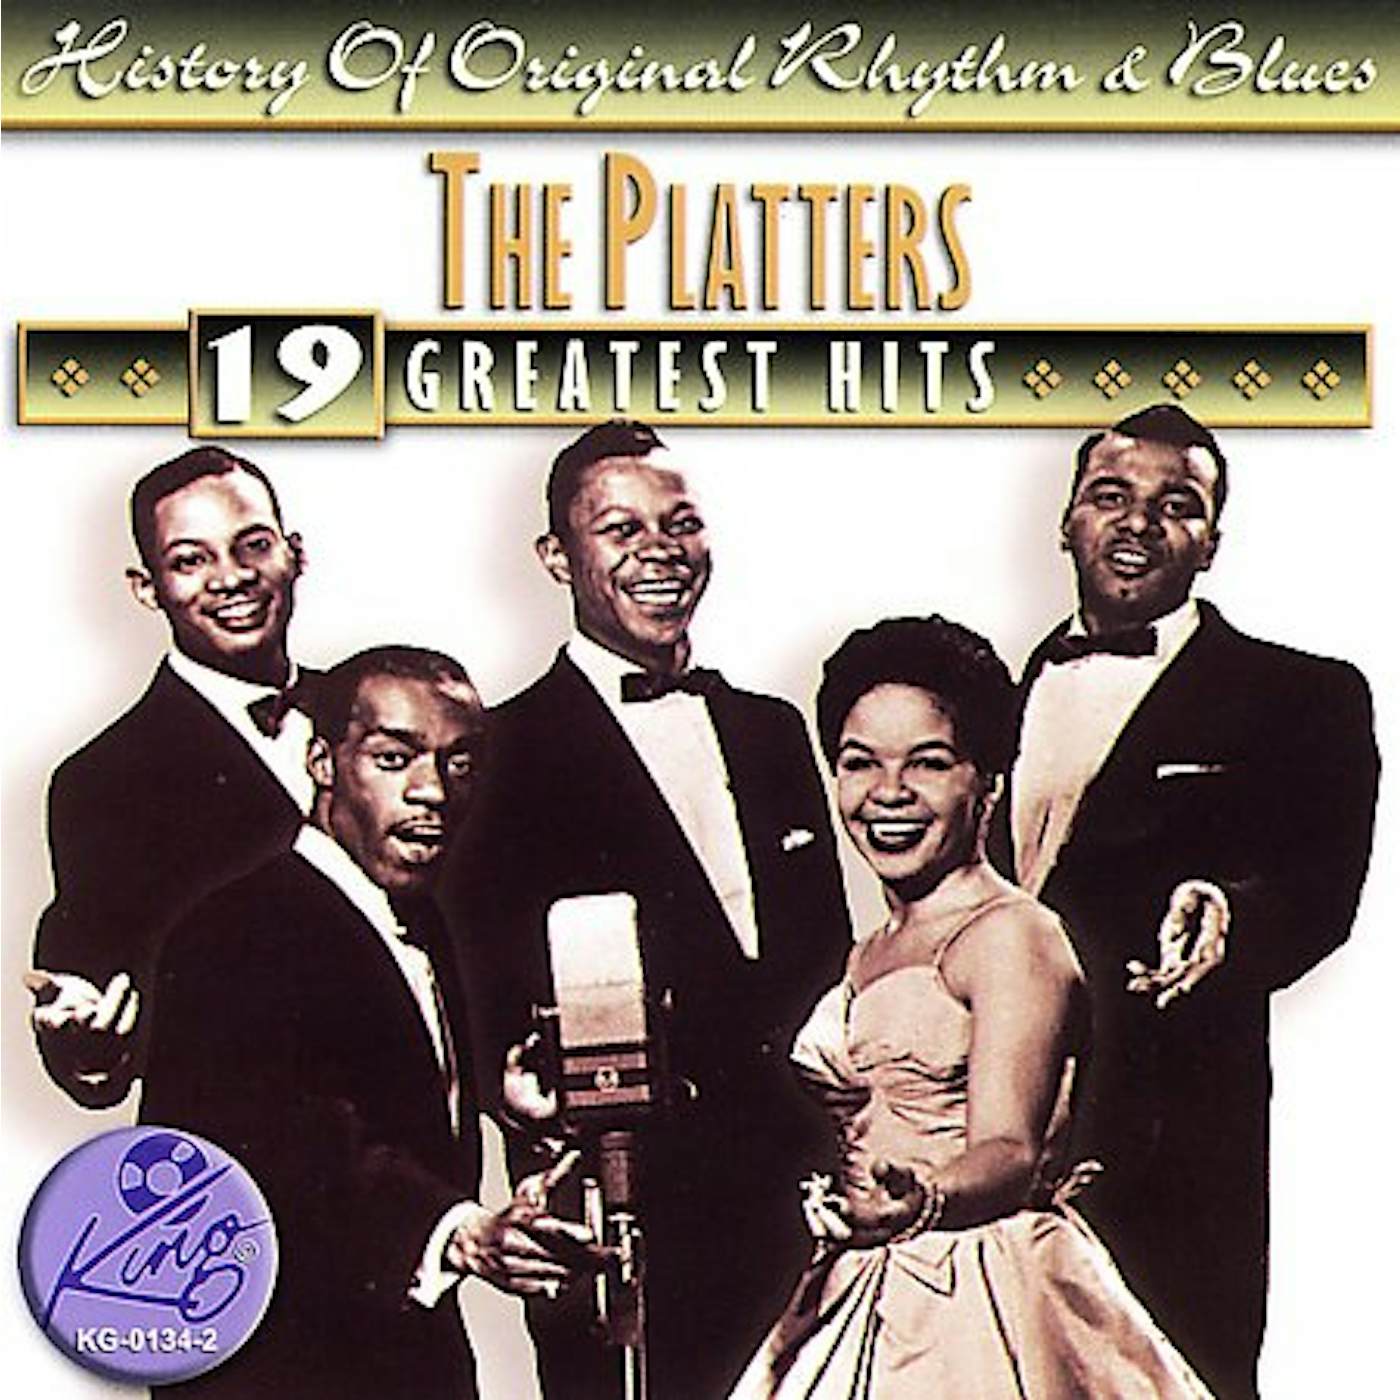 The Platters 19 GREATEST HITS CD